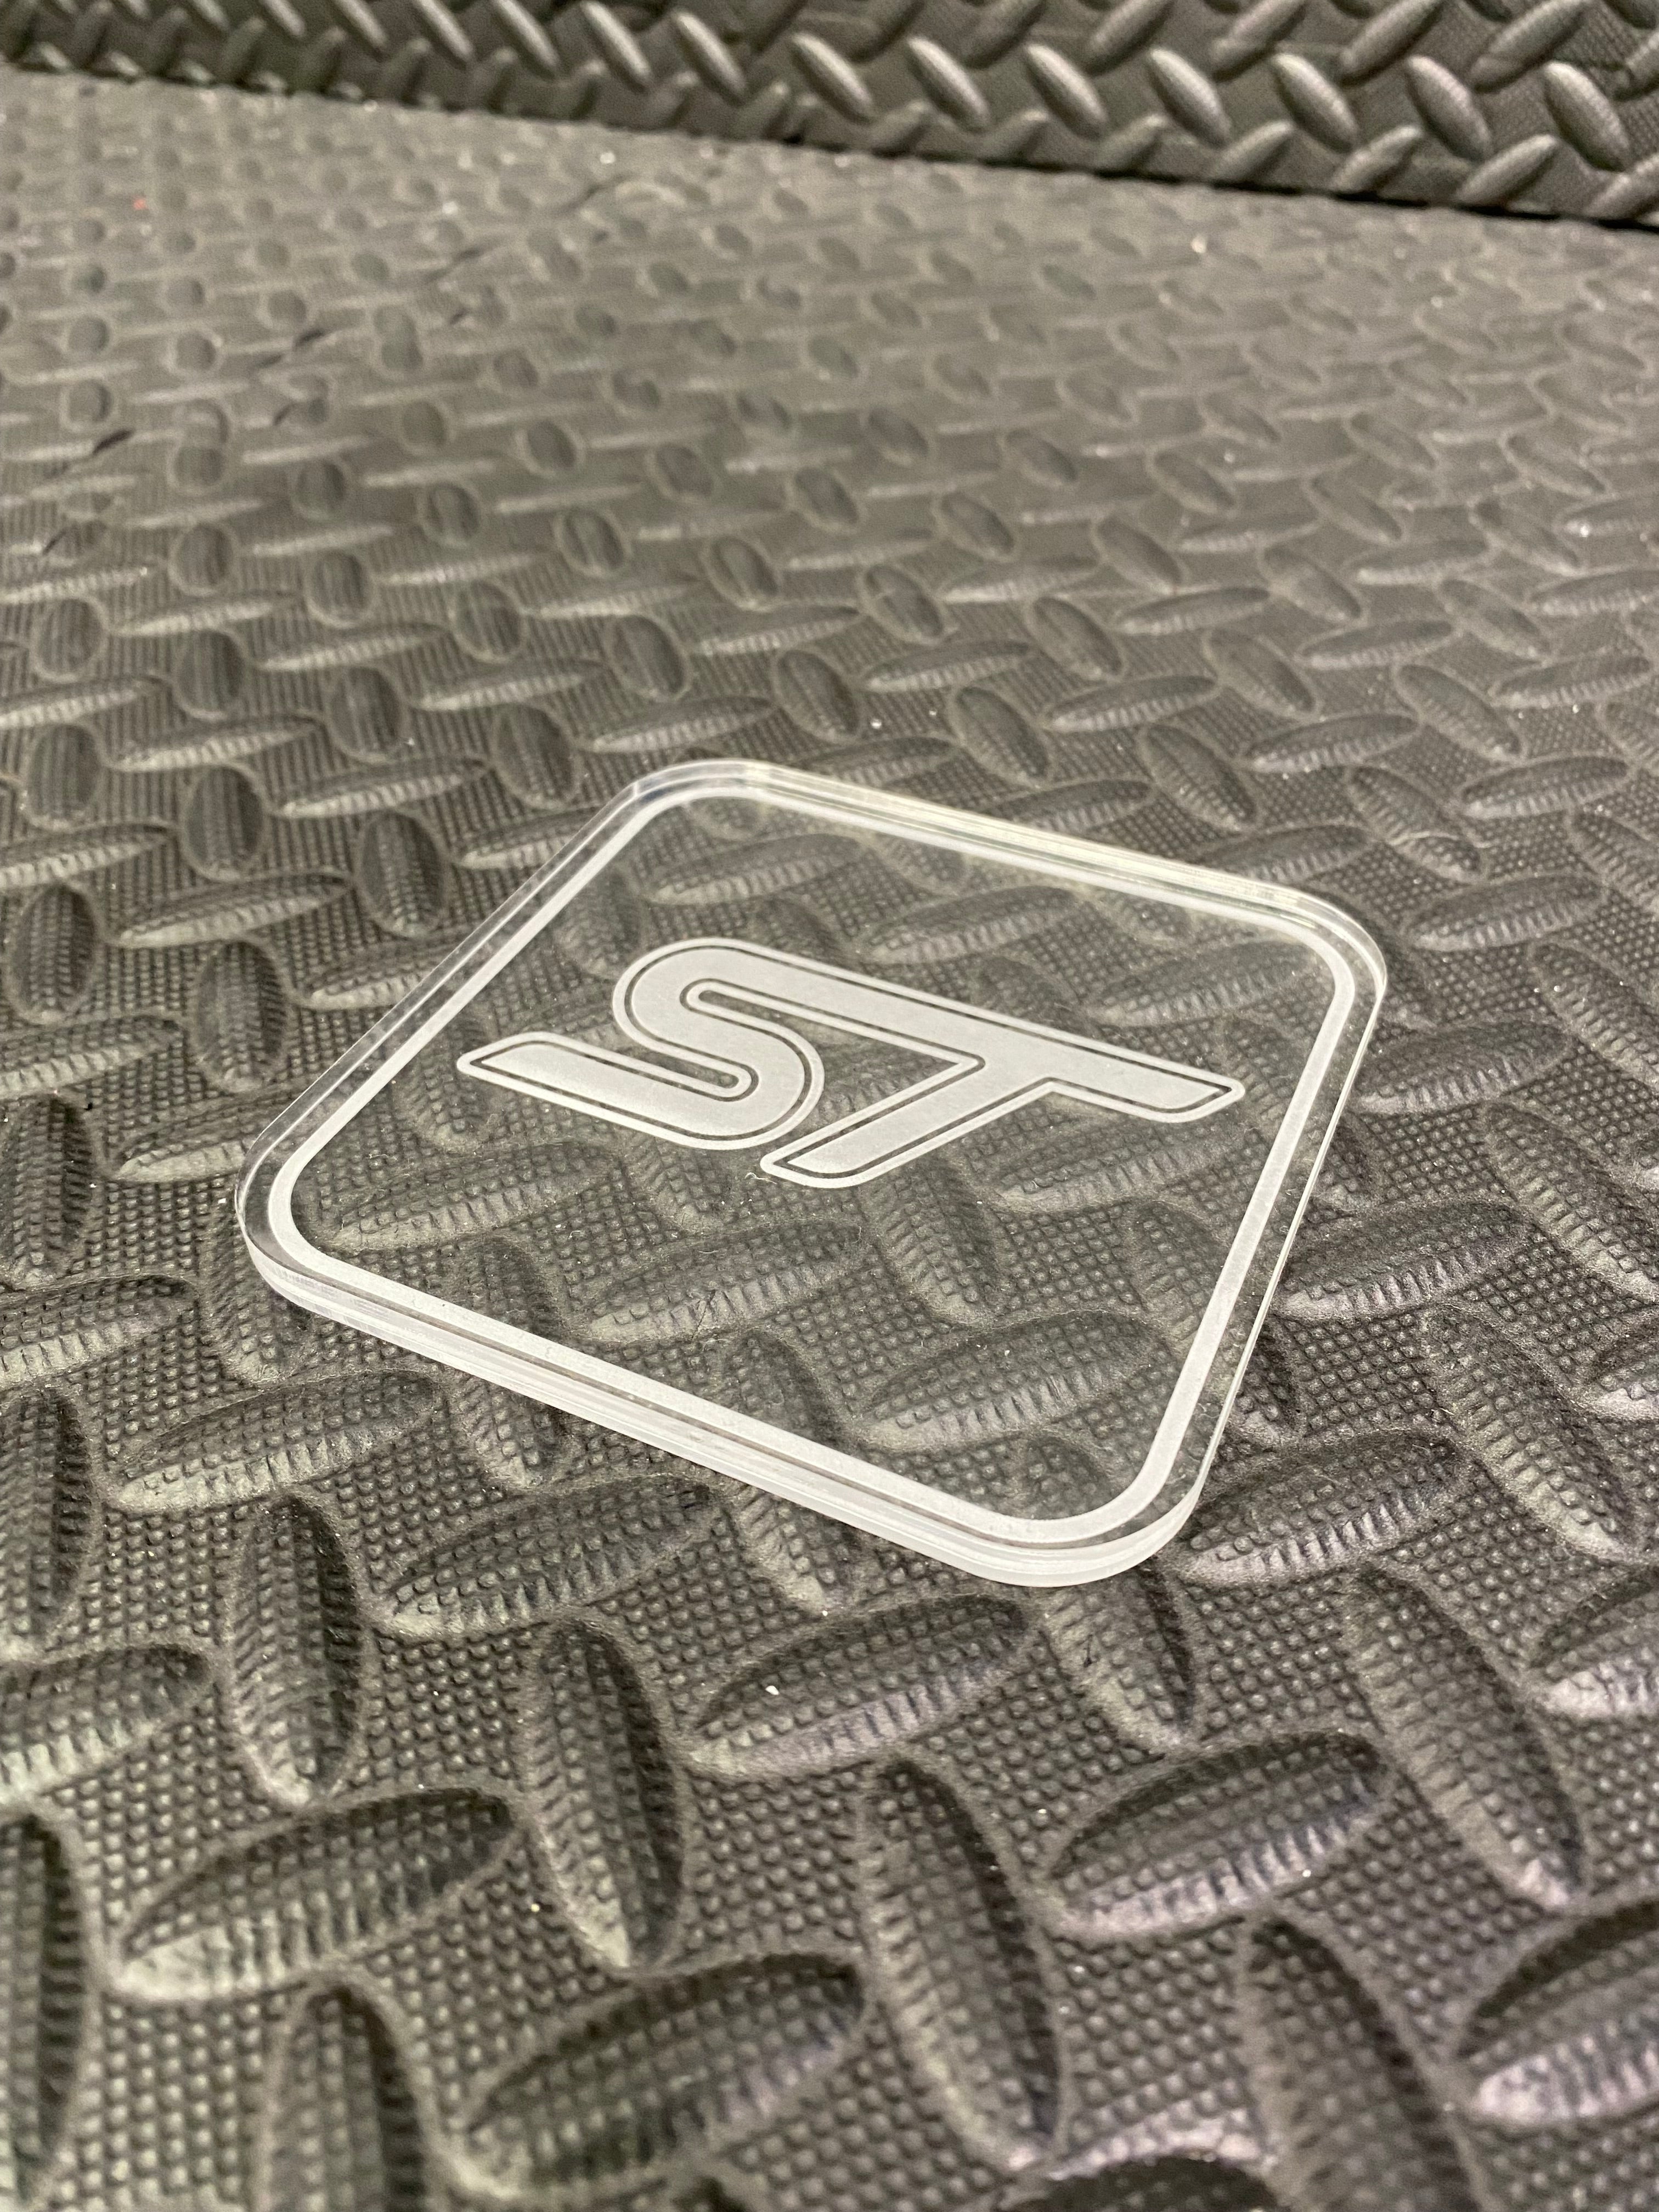 Engraved Drinks Coaster - RS / ST Logos